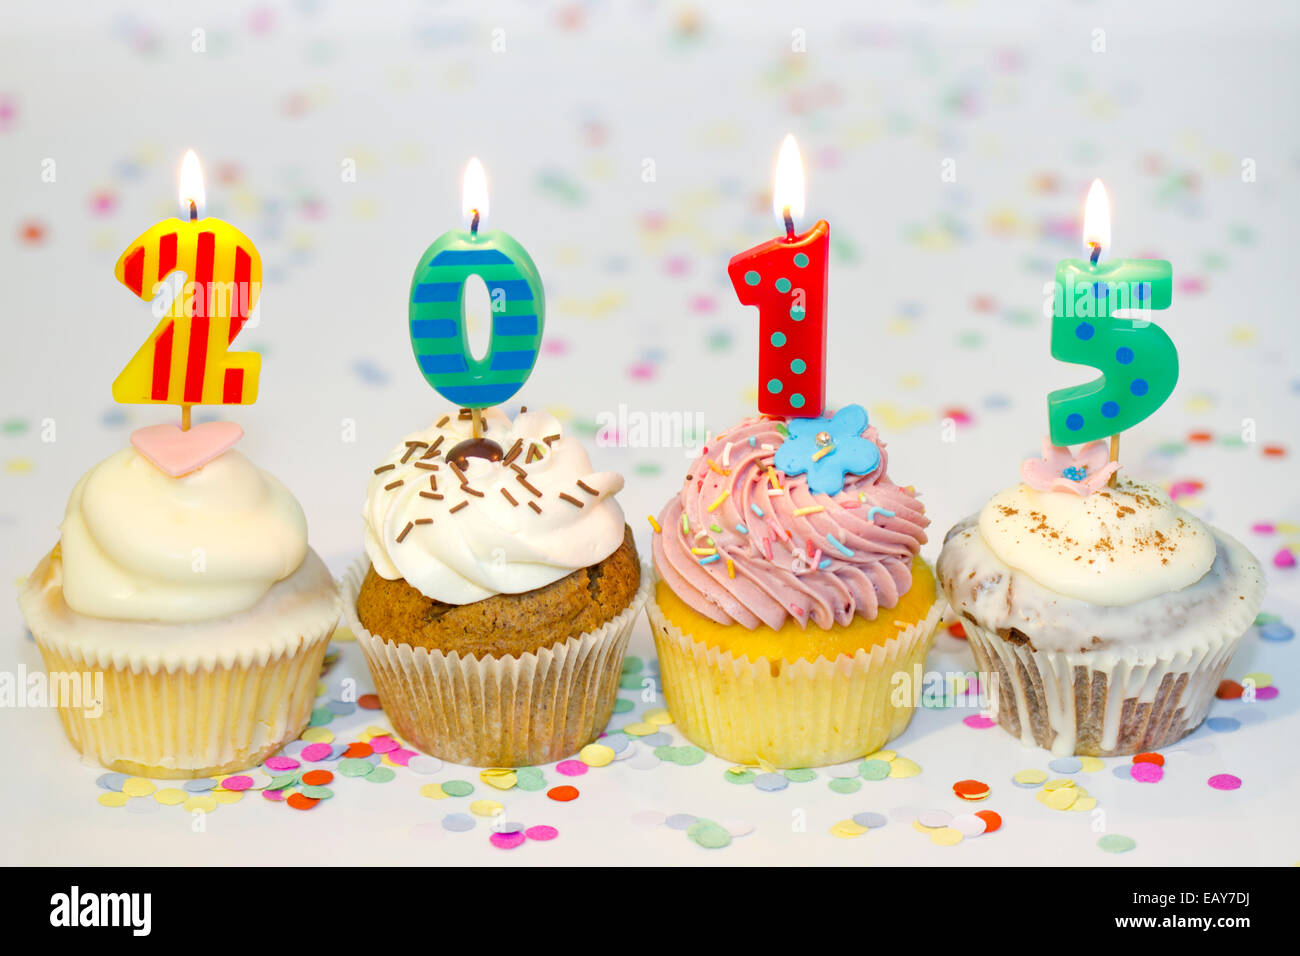 2015 new year cupcakes on abstract colorful background concept Stock Photo